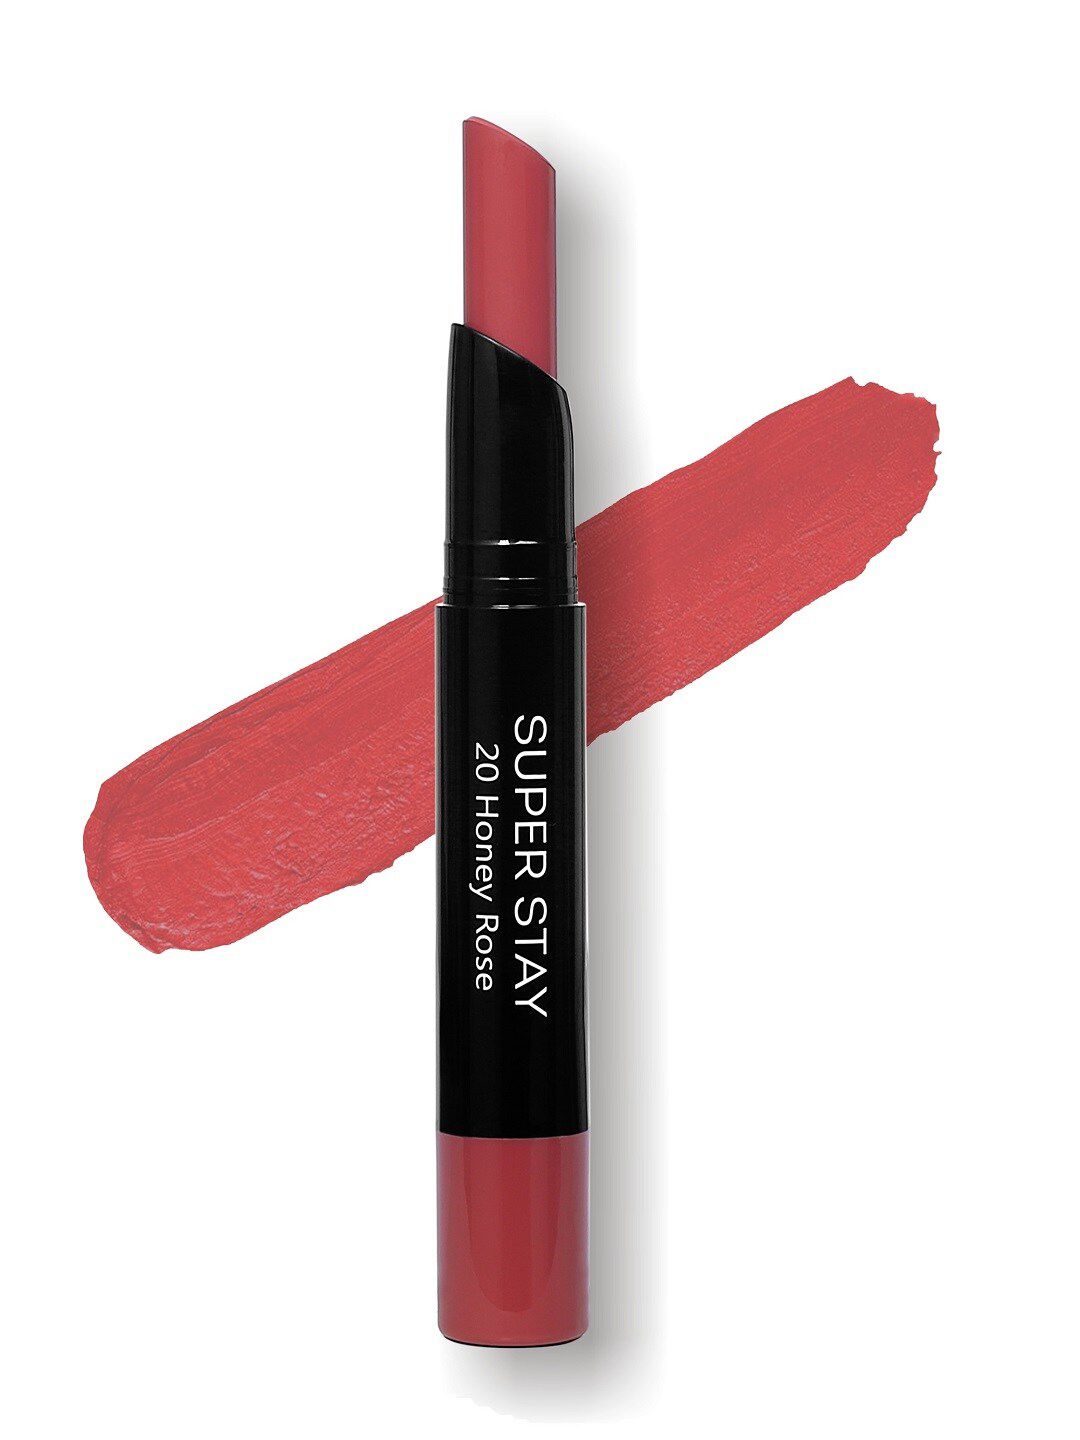 ME-ON Super Stay Matte Lipstick - Honey Rose 20 Price in India